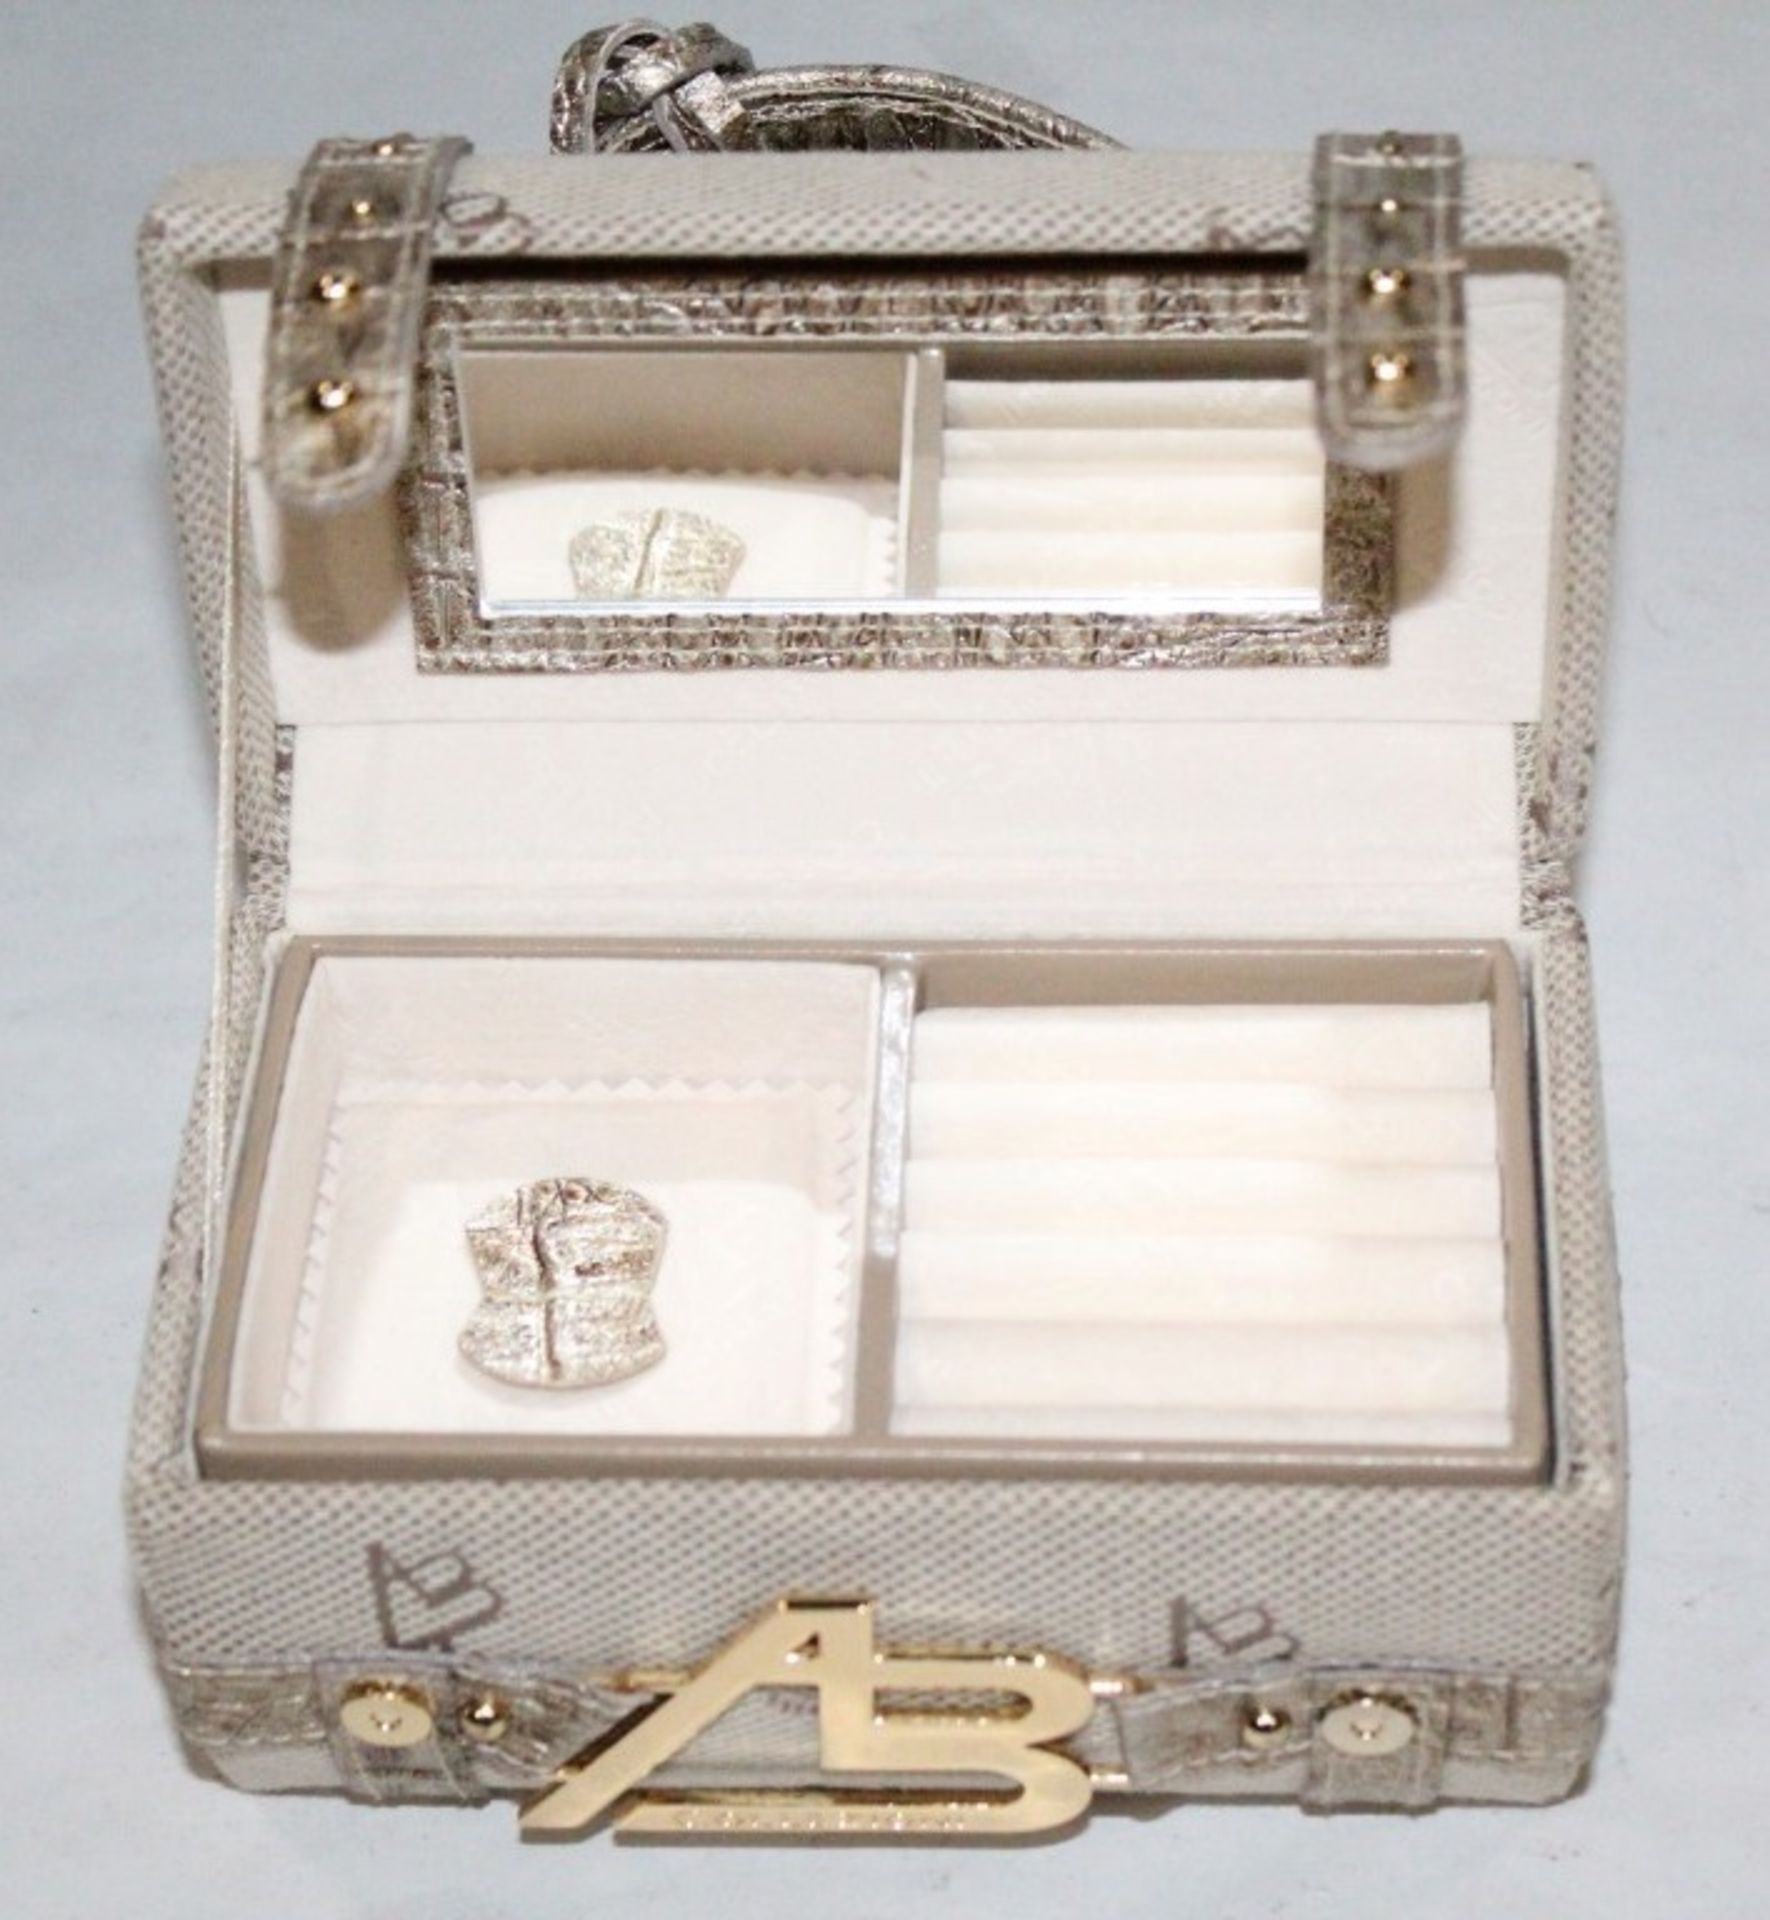 1 x "AB Collezioni" Italian Luxury Jewellery Box (30533) - Ref LT134 – Features A Pull-Out - Image 5 of 5